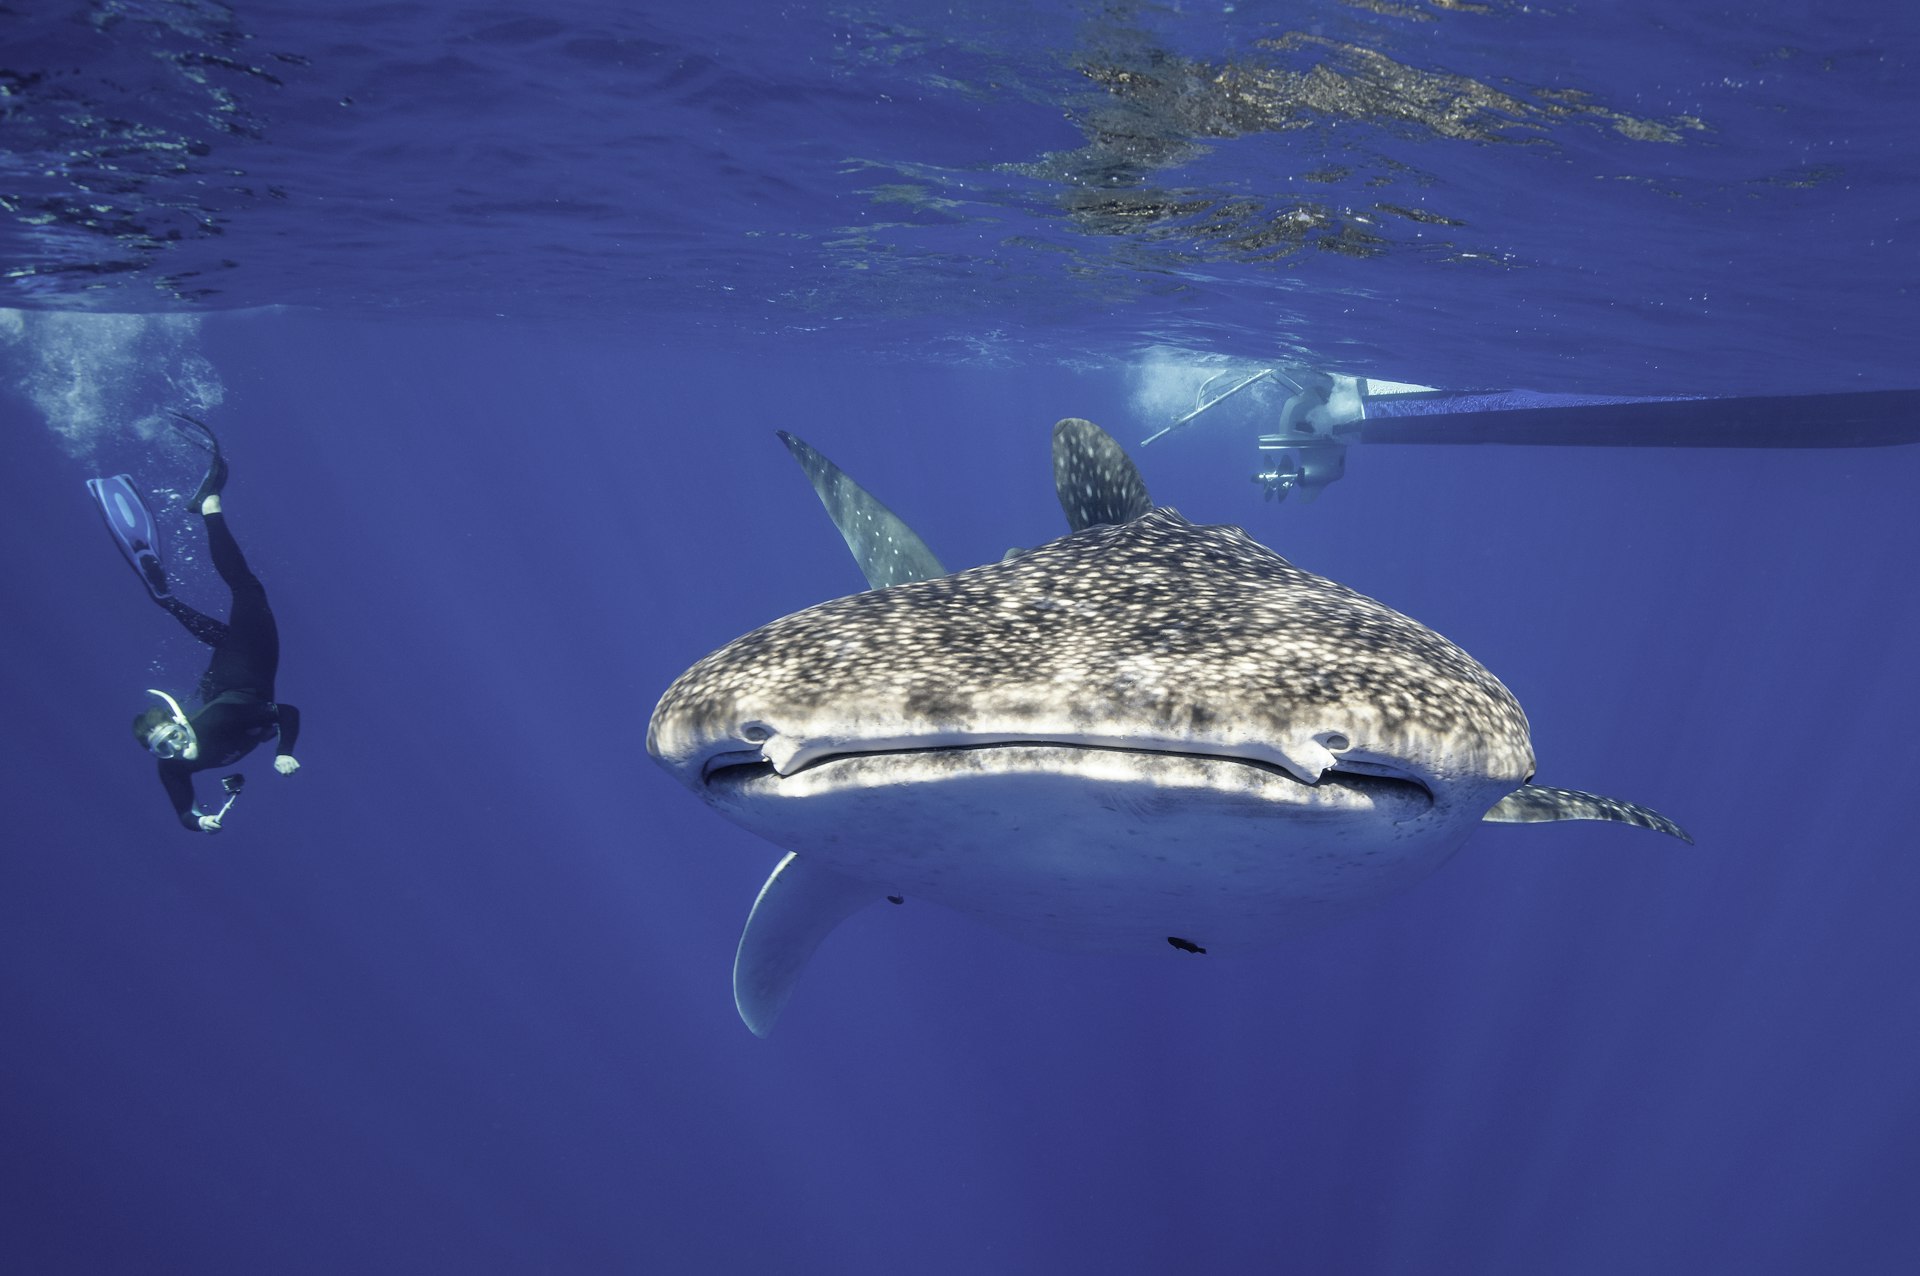 A free diver observes a passing whale shark at an appropriate distance